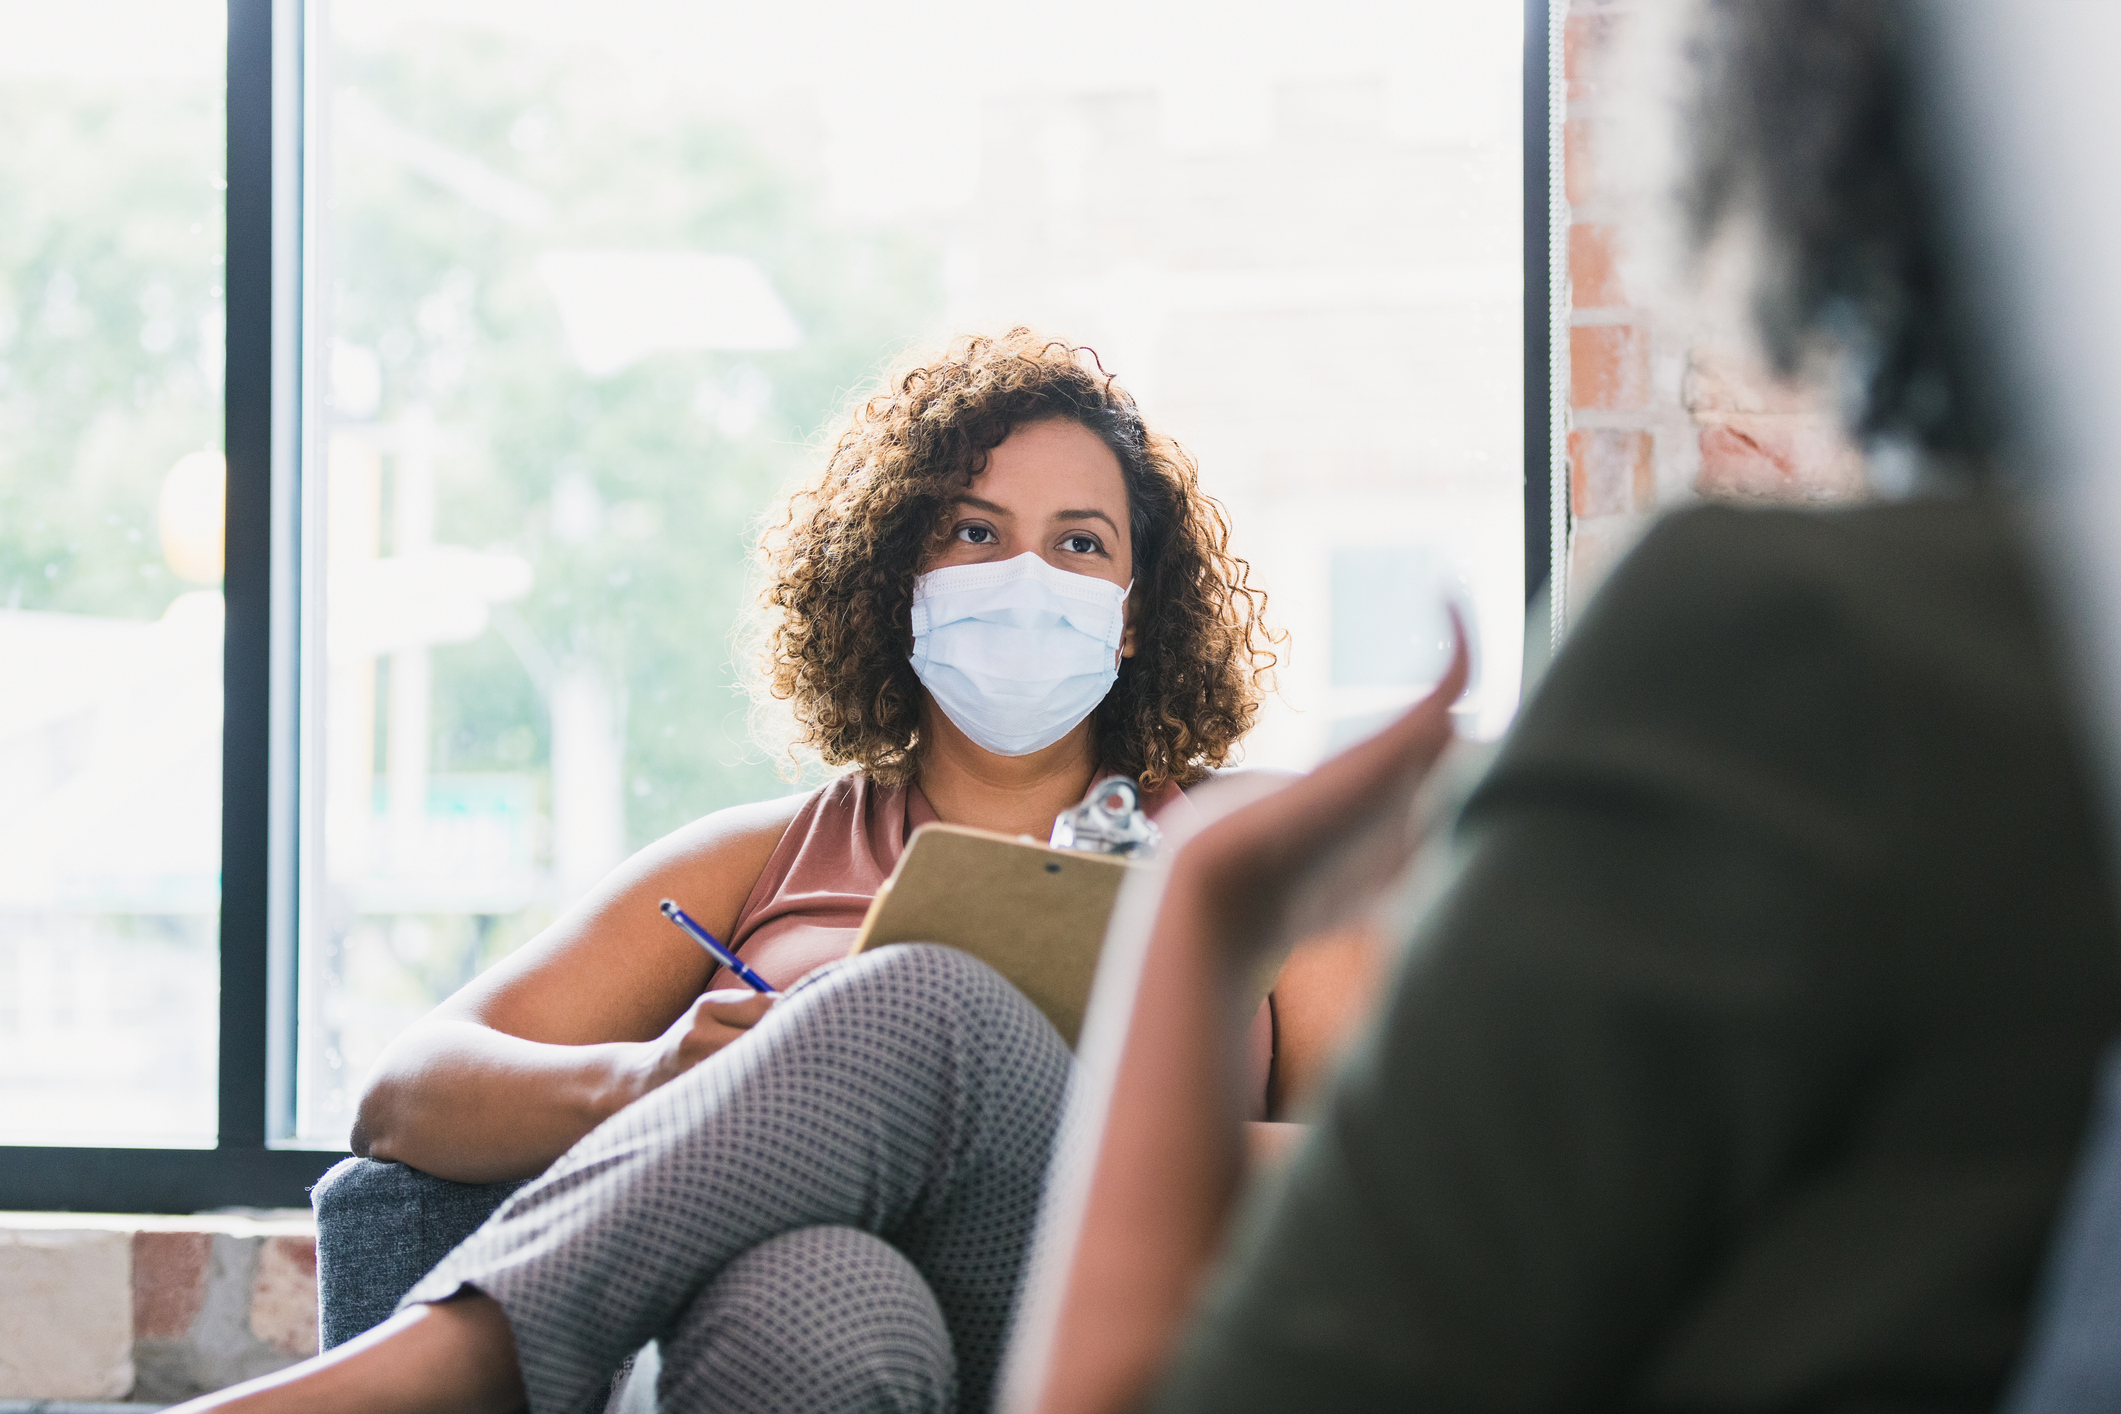 stock photo of counseling with protective masks on